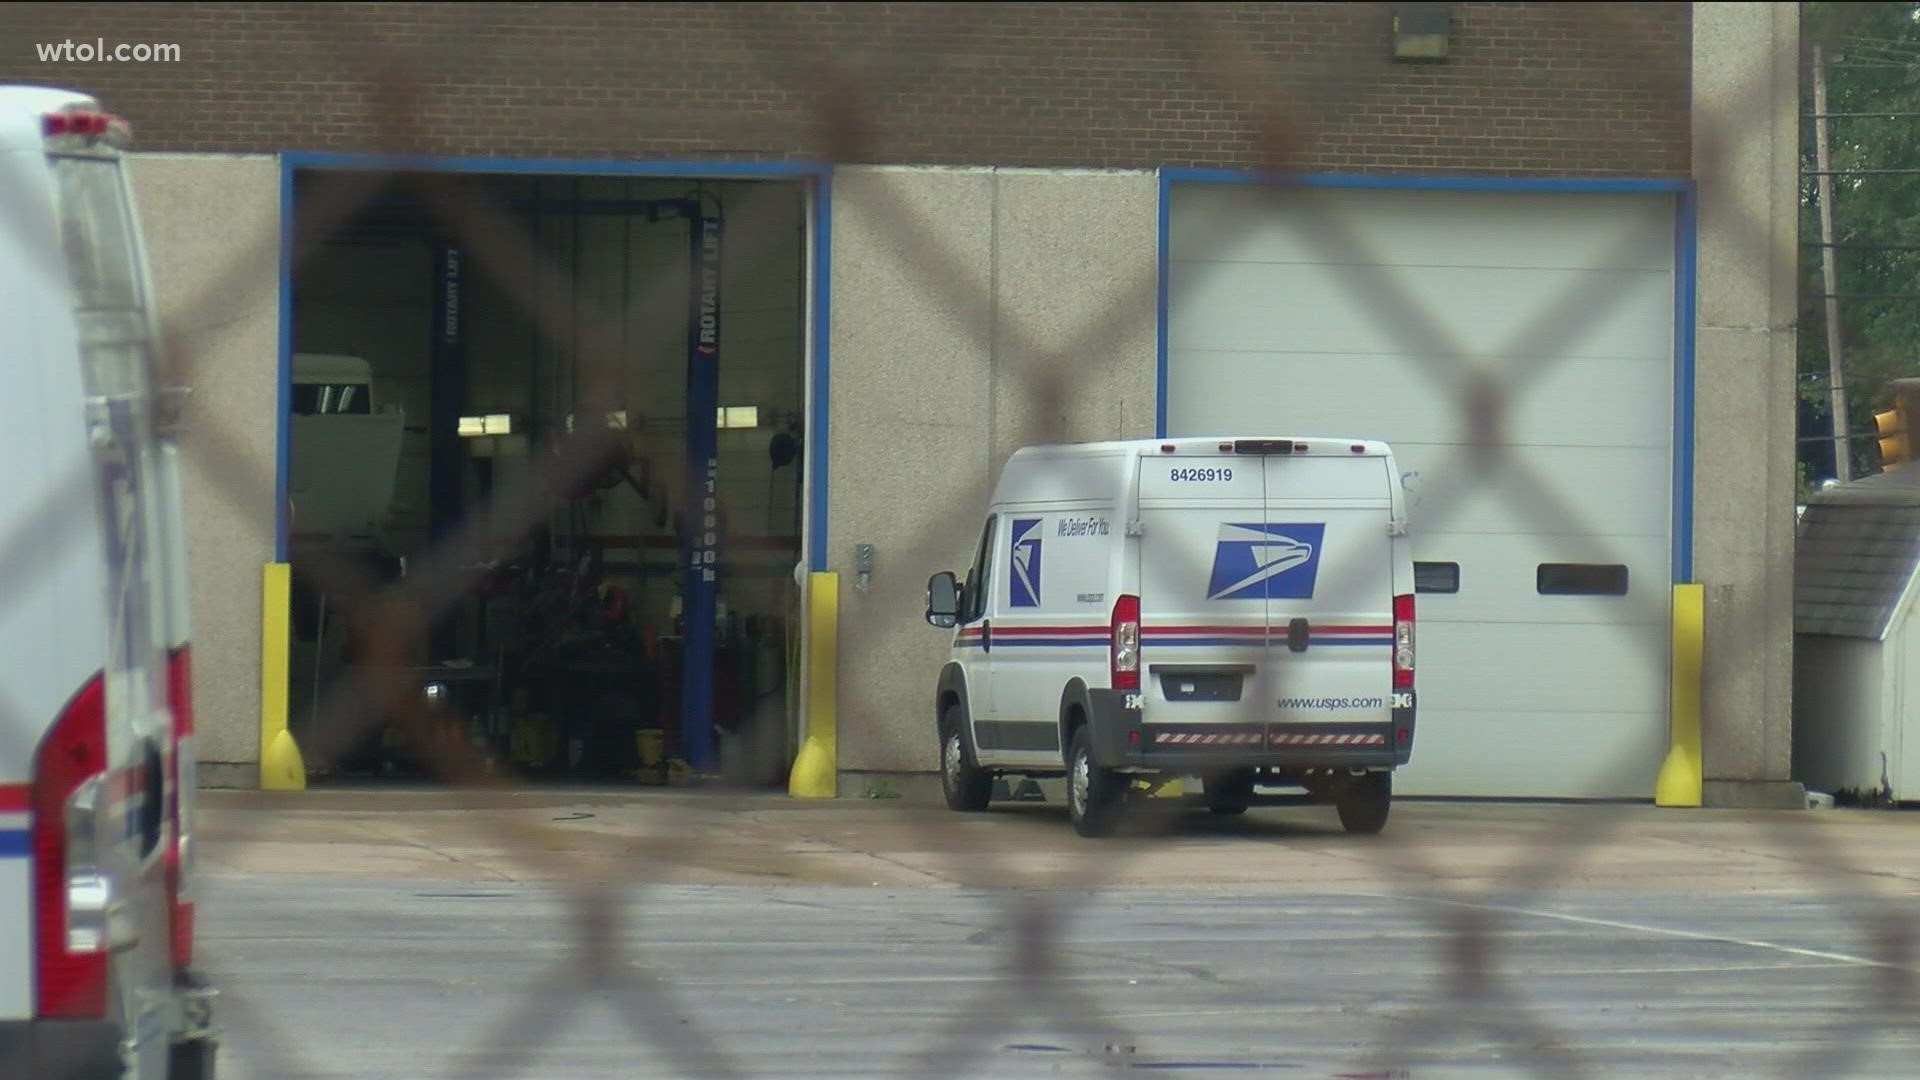 What started out as a normal work day for a Toledo postal worker, turned into a scary situation.